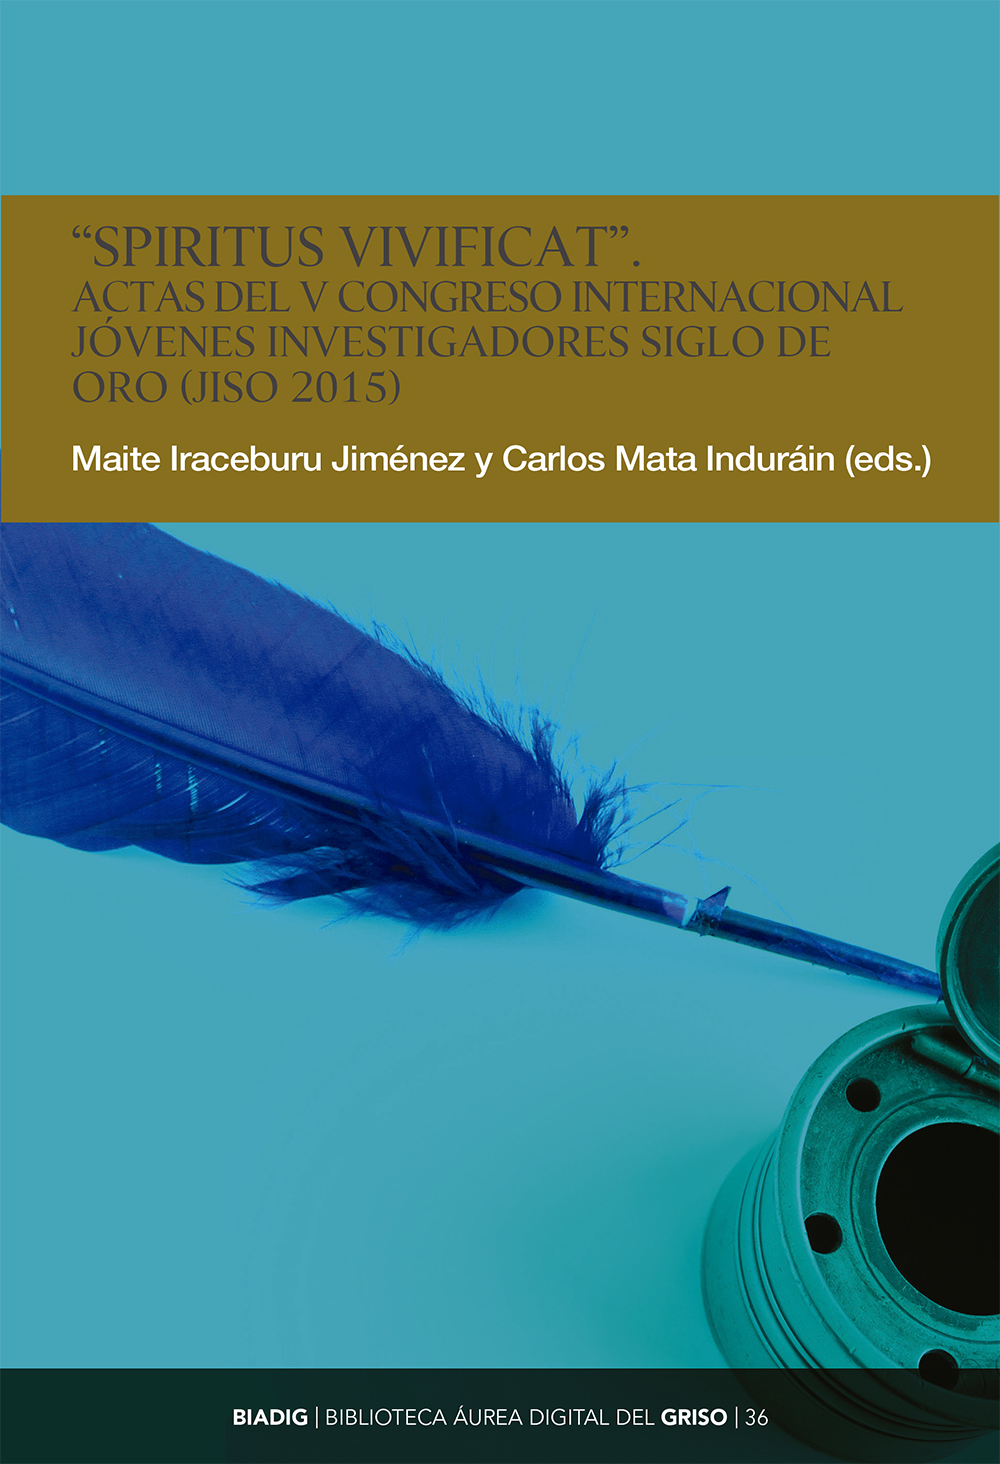 BIADIG 36. "Spiritus vivificat". conference proceedings of the V congress International Young Researchers Golden Age (JISO 2015)